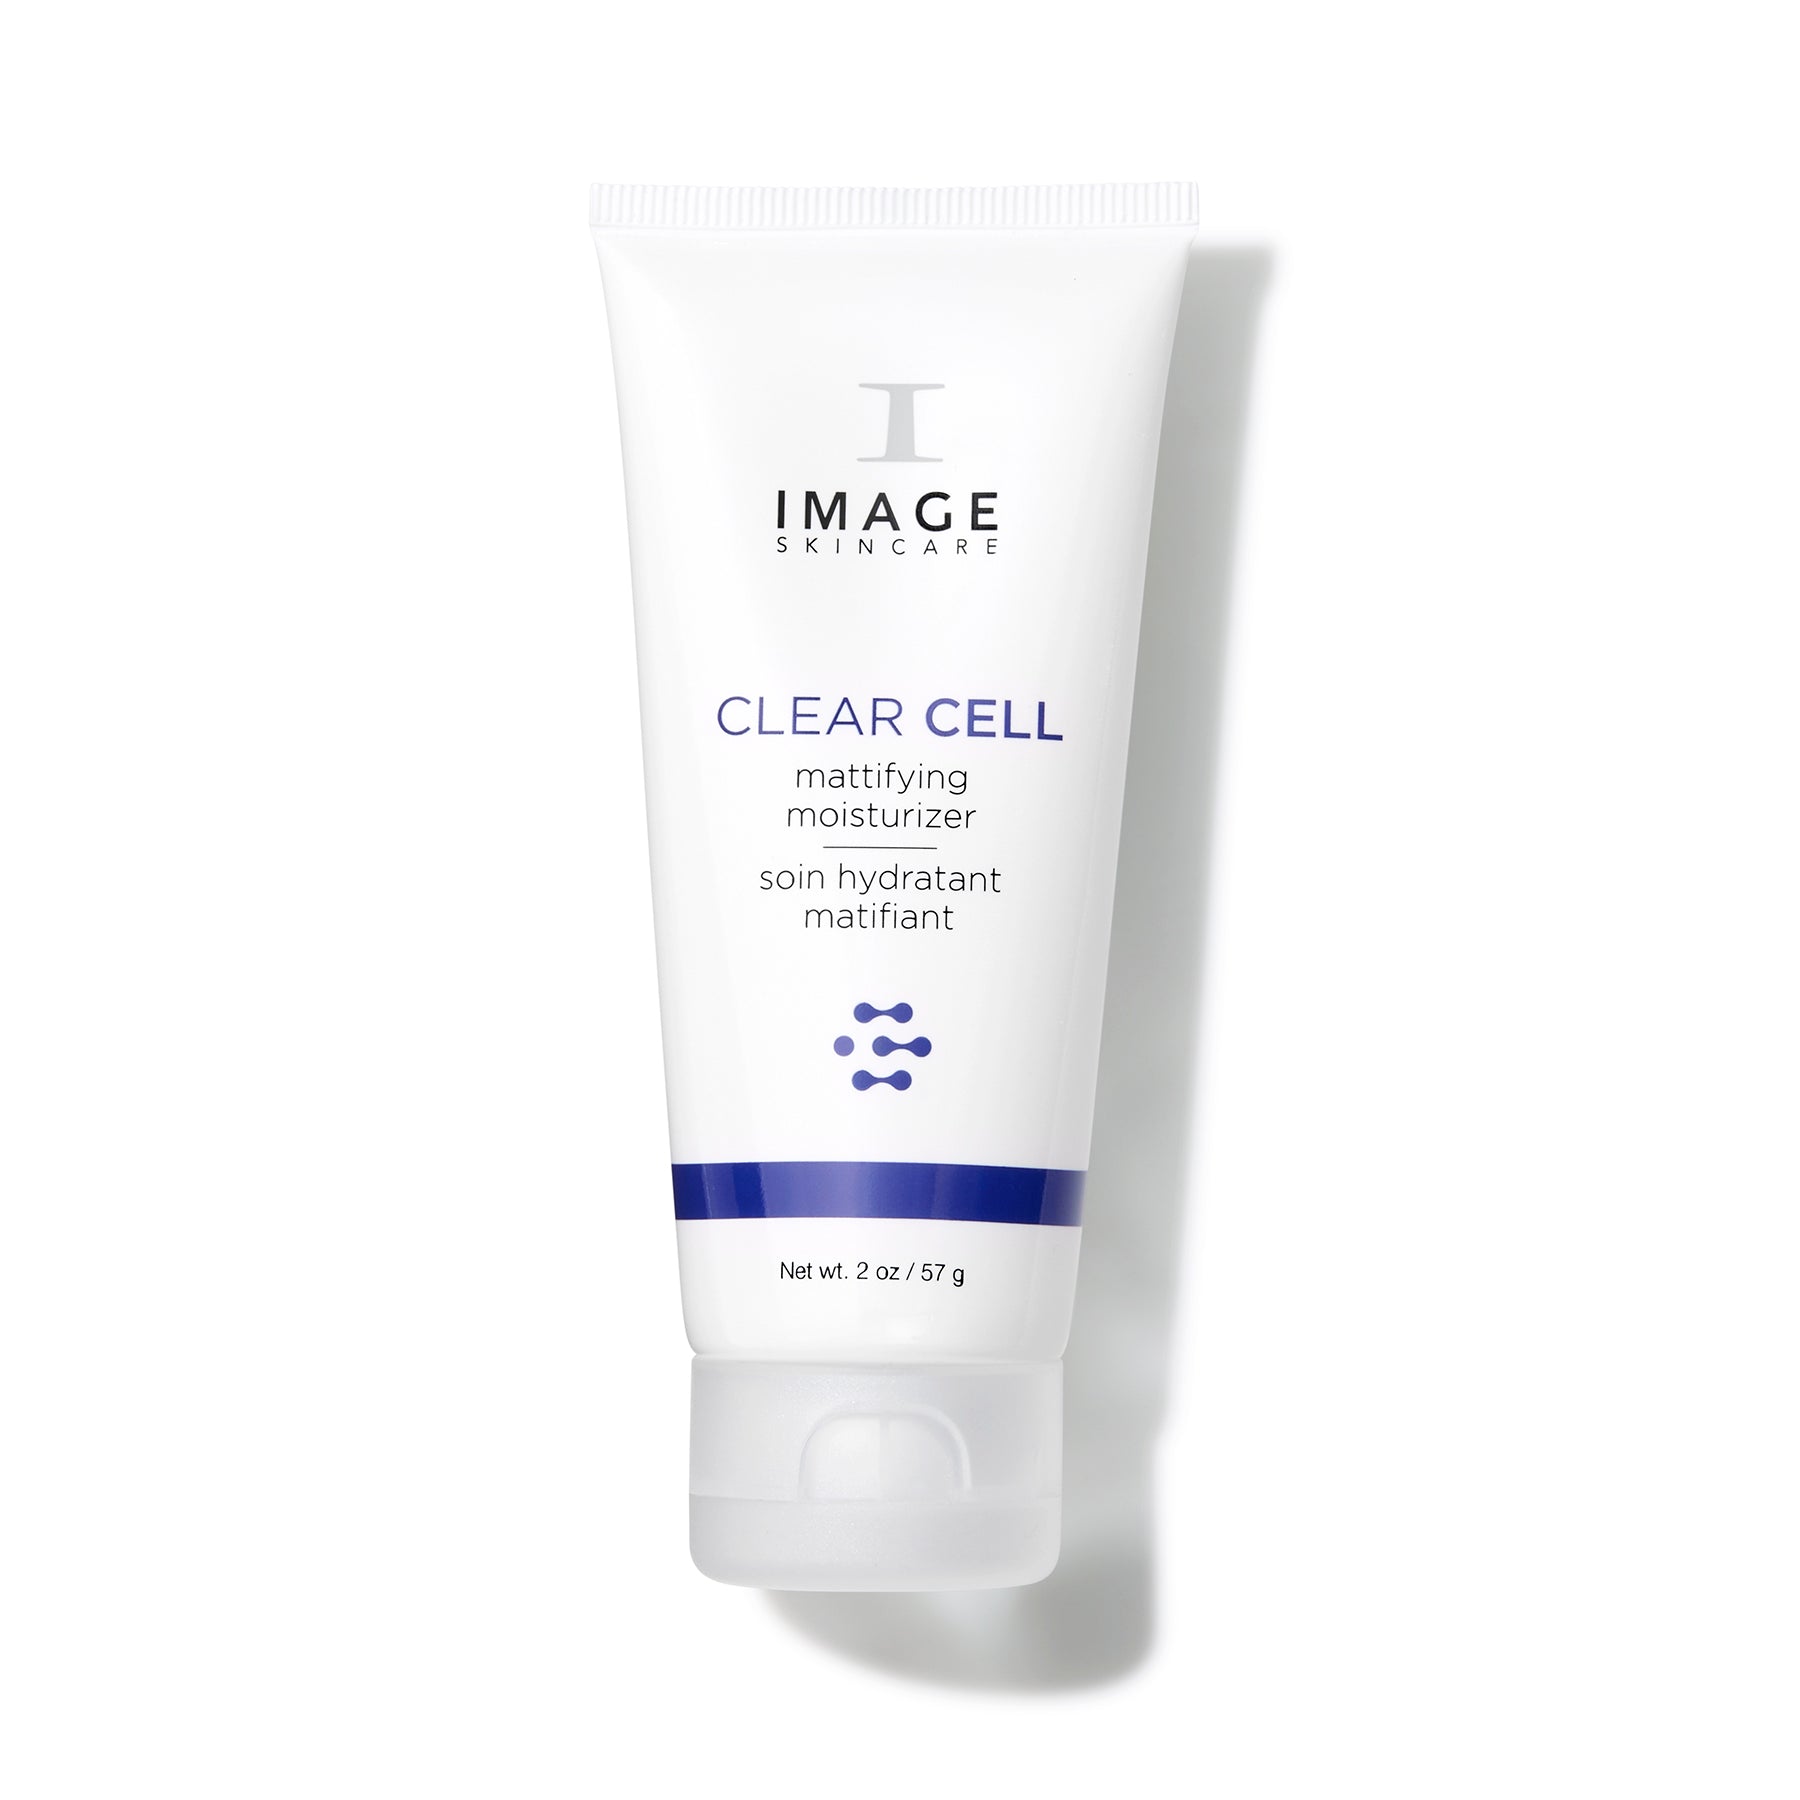 Image Skincare Clear Cell Mattifying Moisturizer Shop At Exclusive Beauty